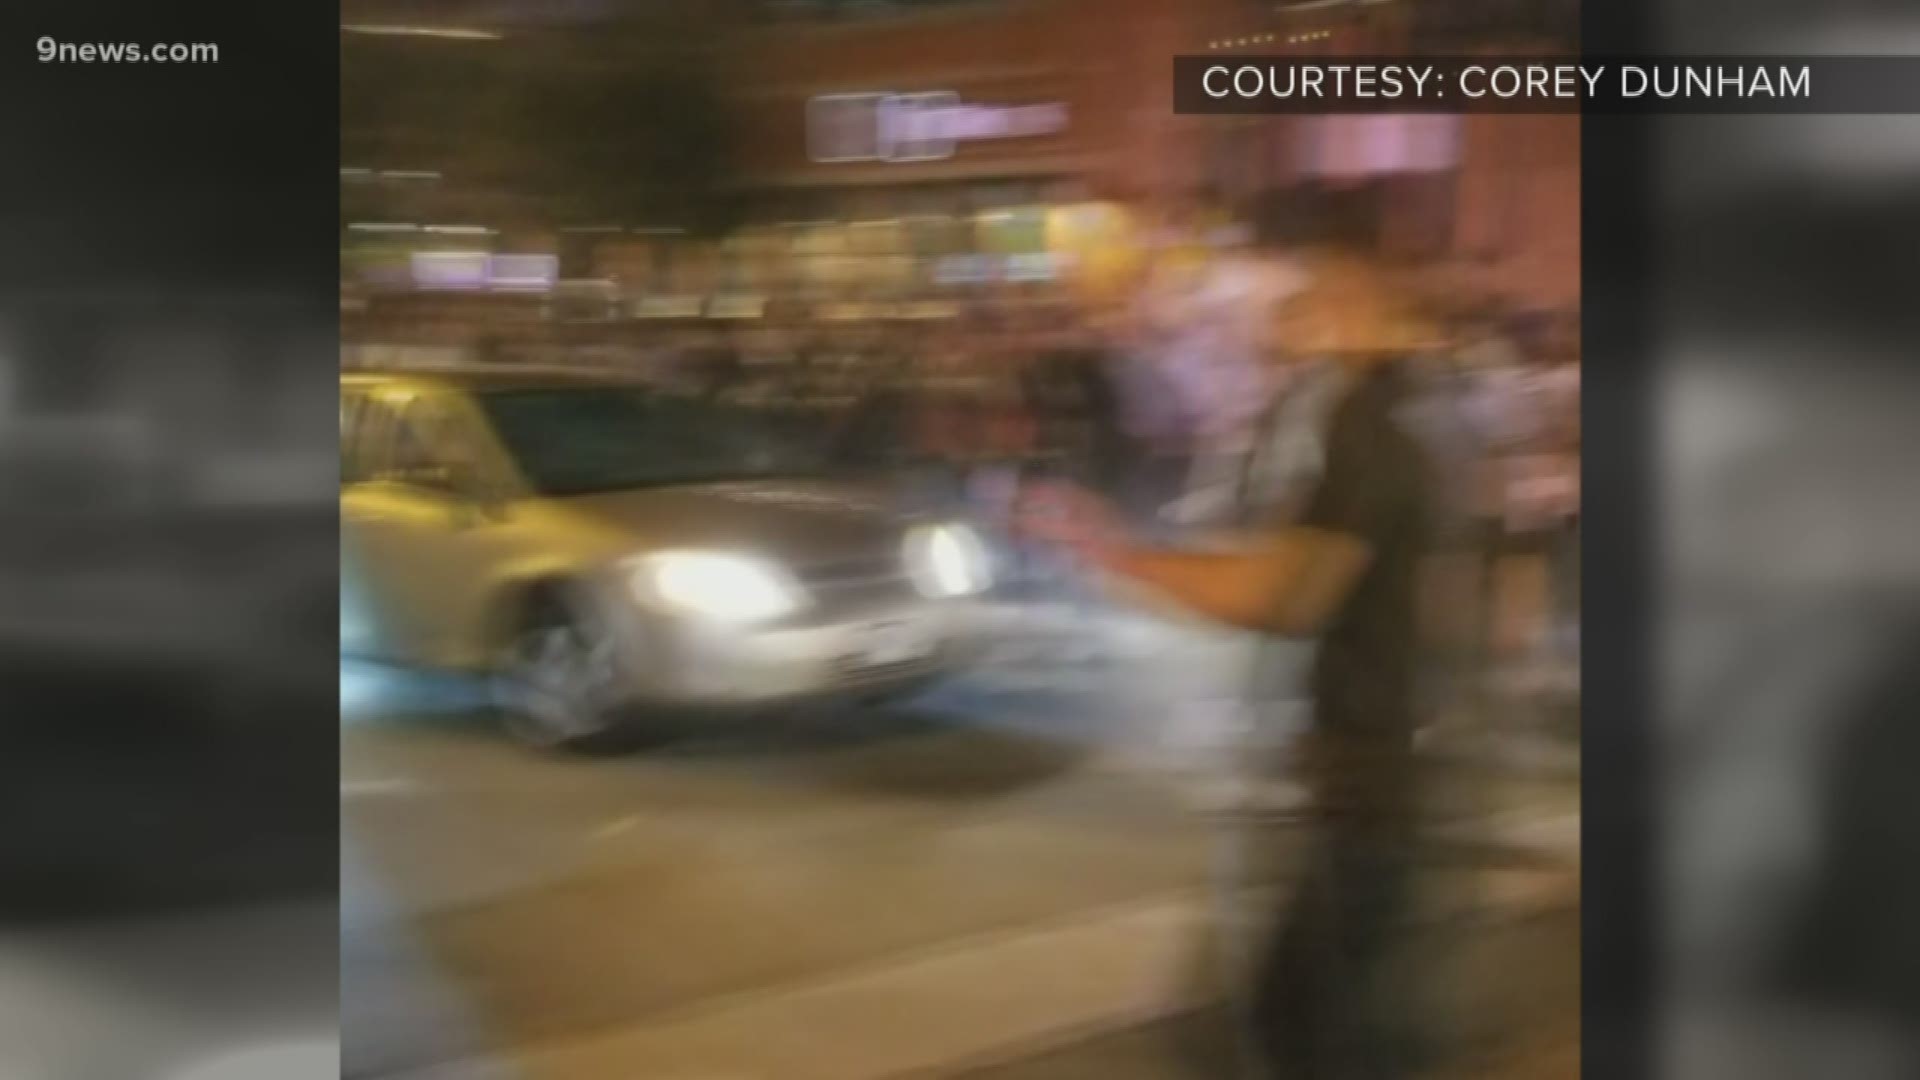 The Denver Police Department is looking for a hit-and-run driver accused of running into two people in LoDo over the weekend.